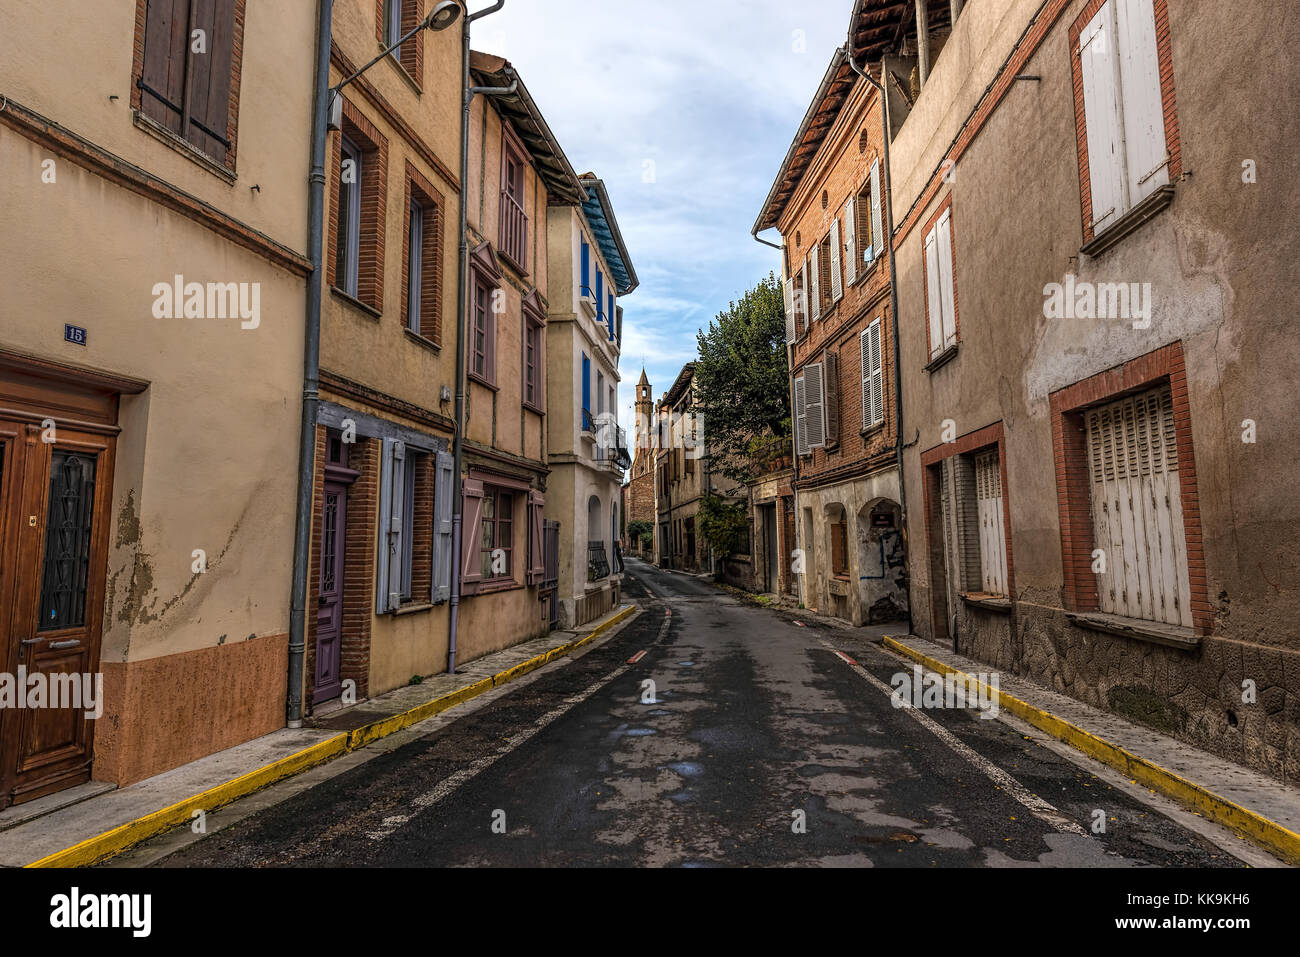 Street leading to main cathedral in the distance of an old town in southern France, Rabastens,Tarn, Midi-Pyrenees Stock Photo